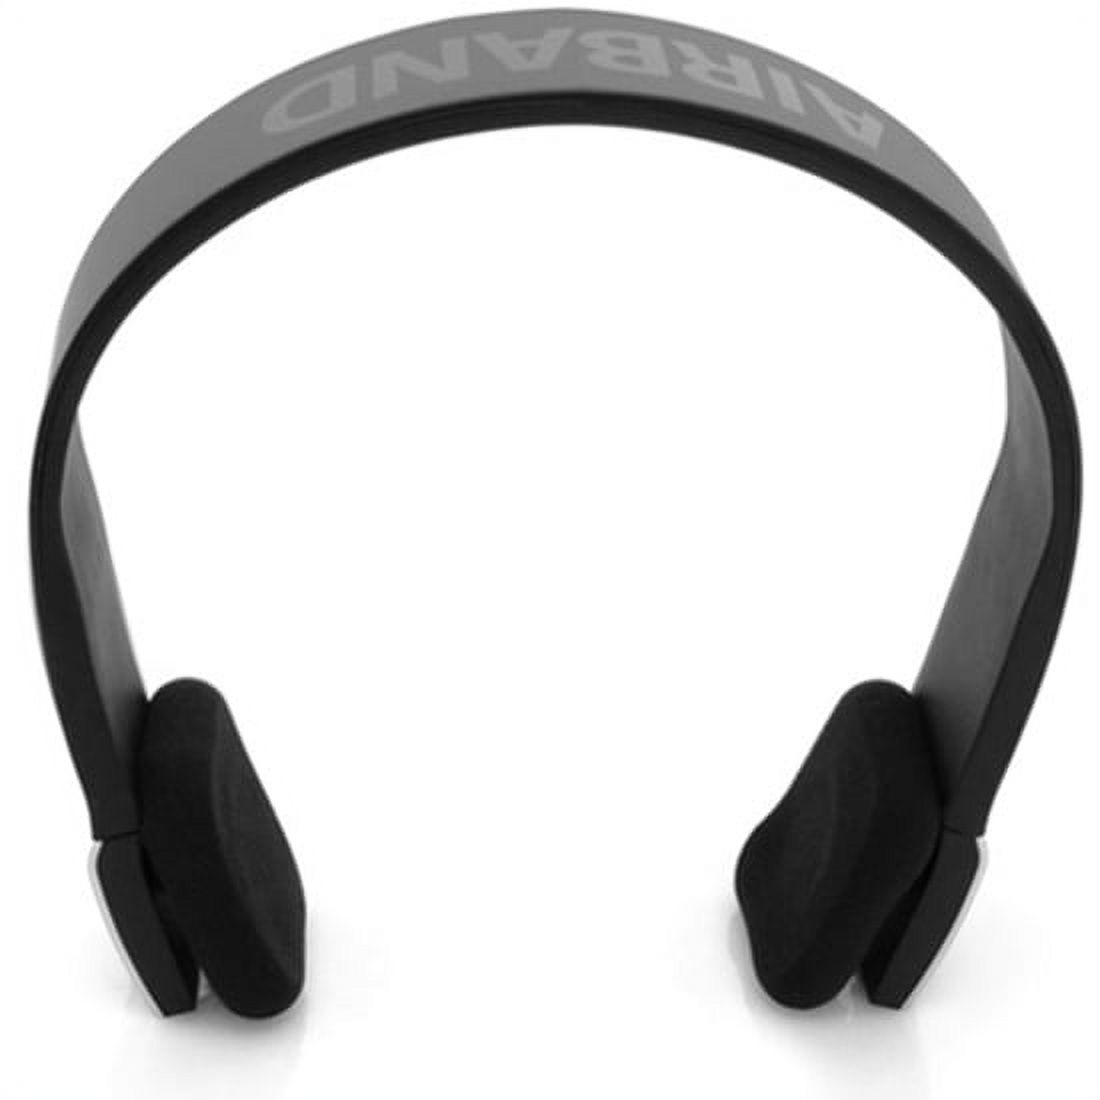 GOgroove BlueVIBE Airband Bluetooth Over-Ear Stereo Headphones - image 2 of 3